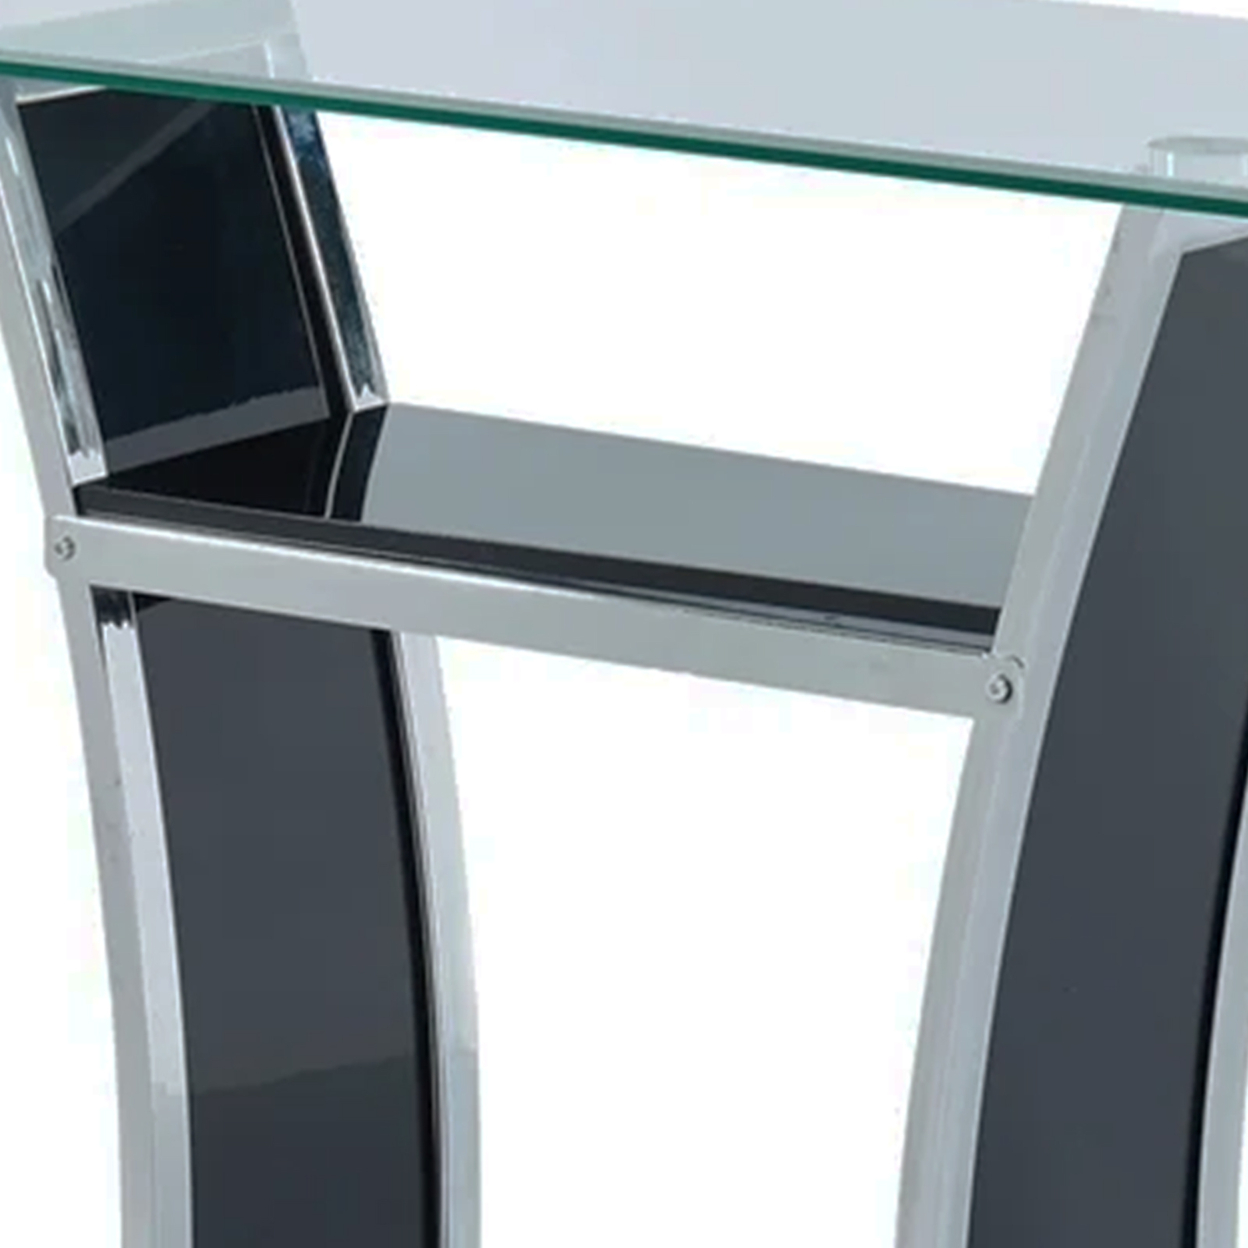 Sofa Table With Chrome Trimmed Curved Sides And Open Bottom Shelf, Black- Saltoro Sherpi